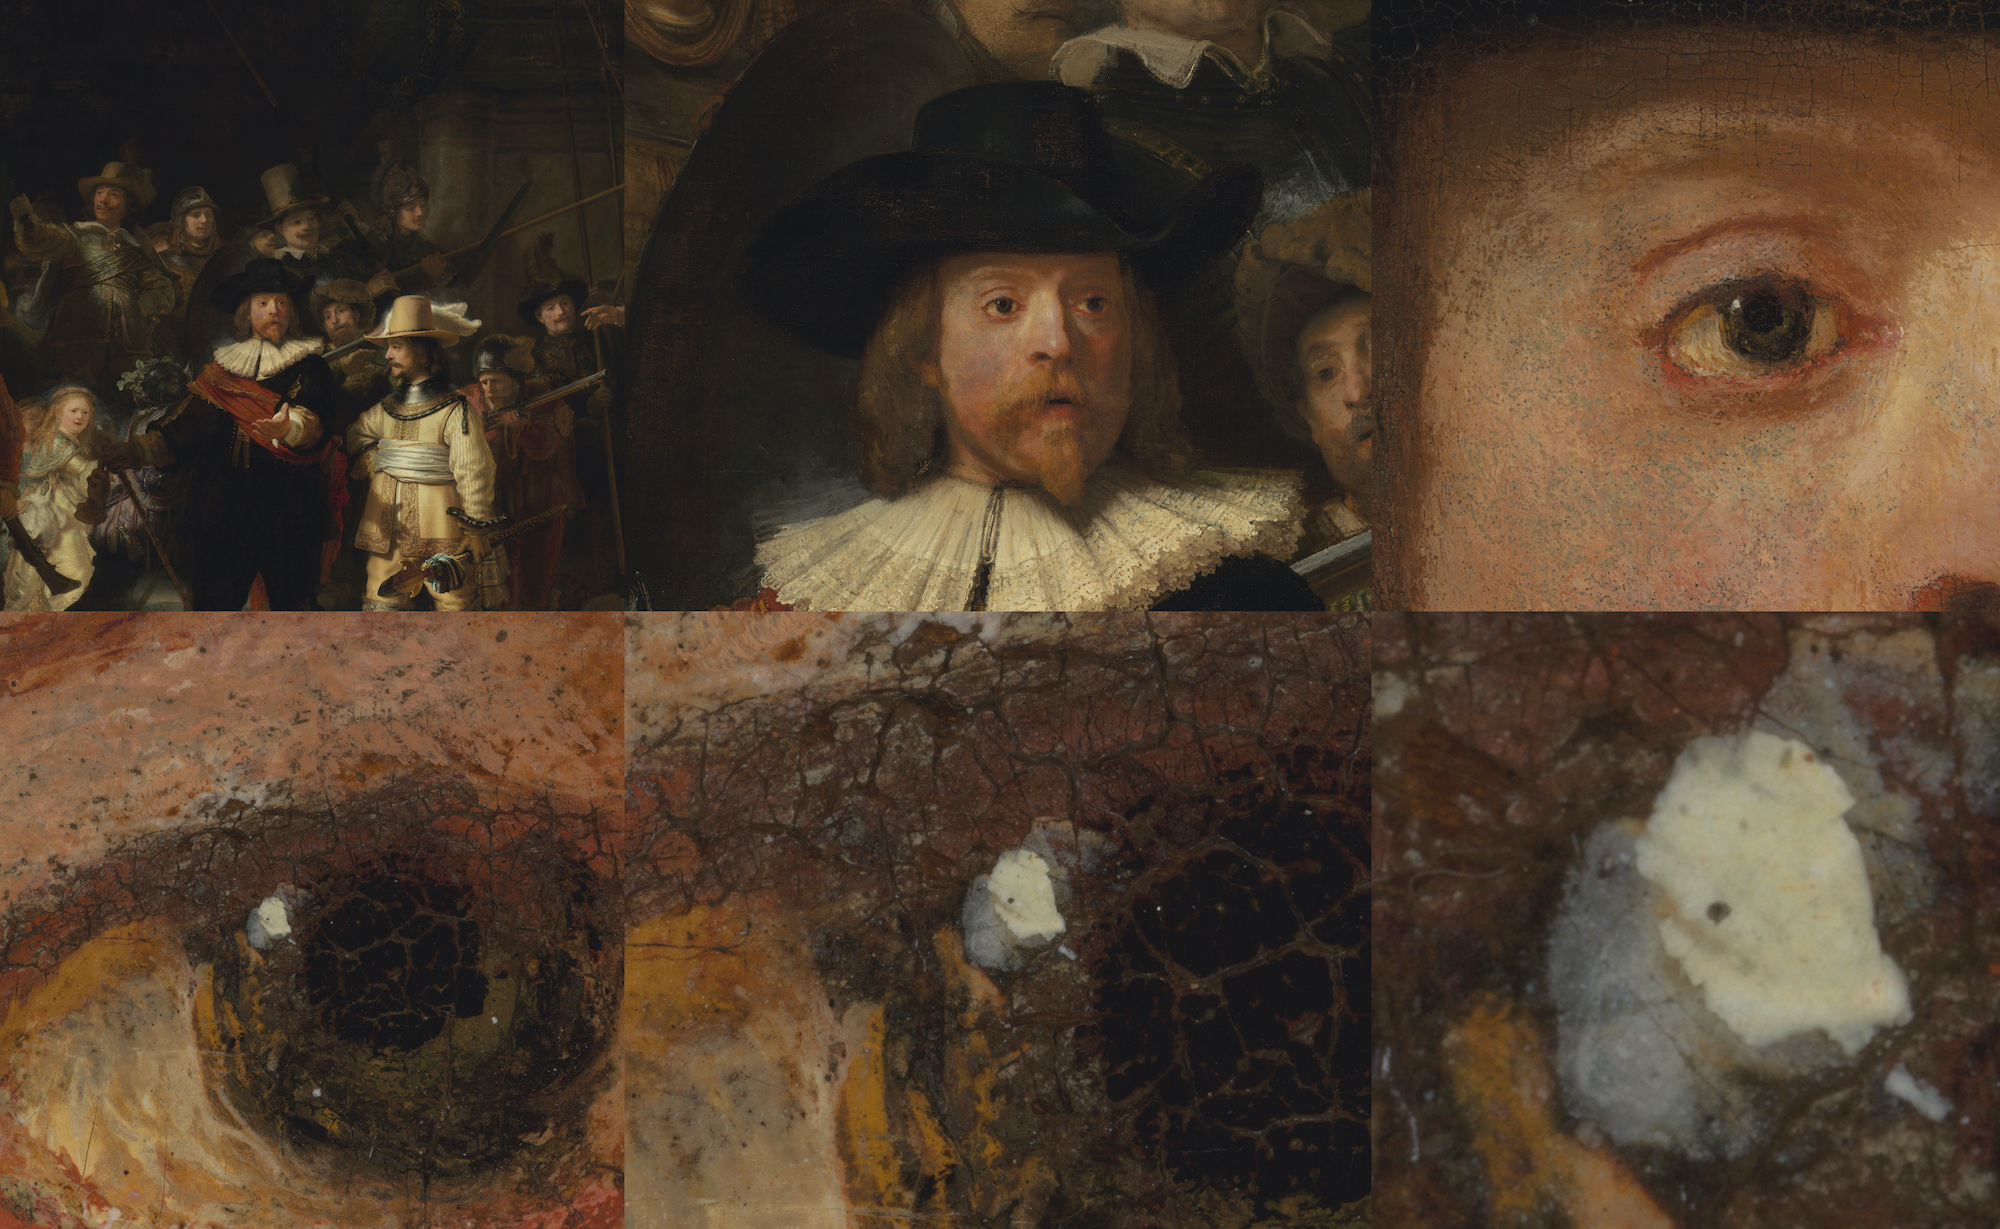 Rembrandt's oil painting "The Night Watch" restored and broken down into six high-res squares